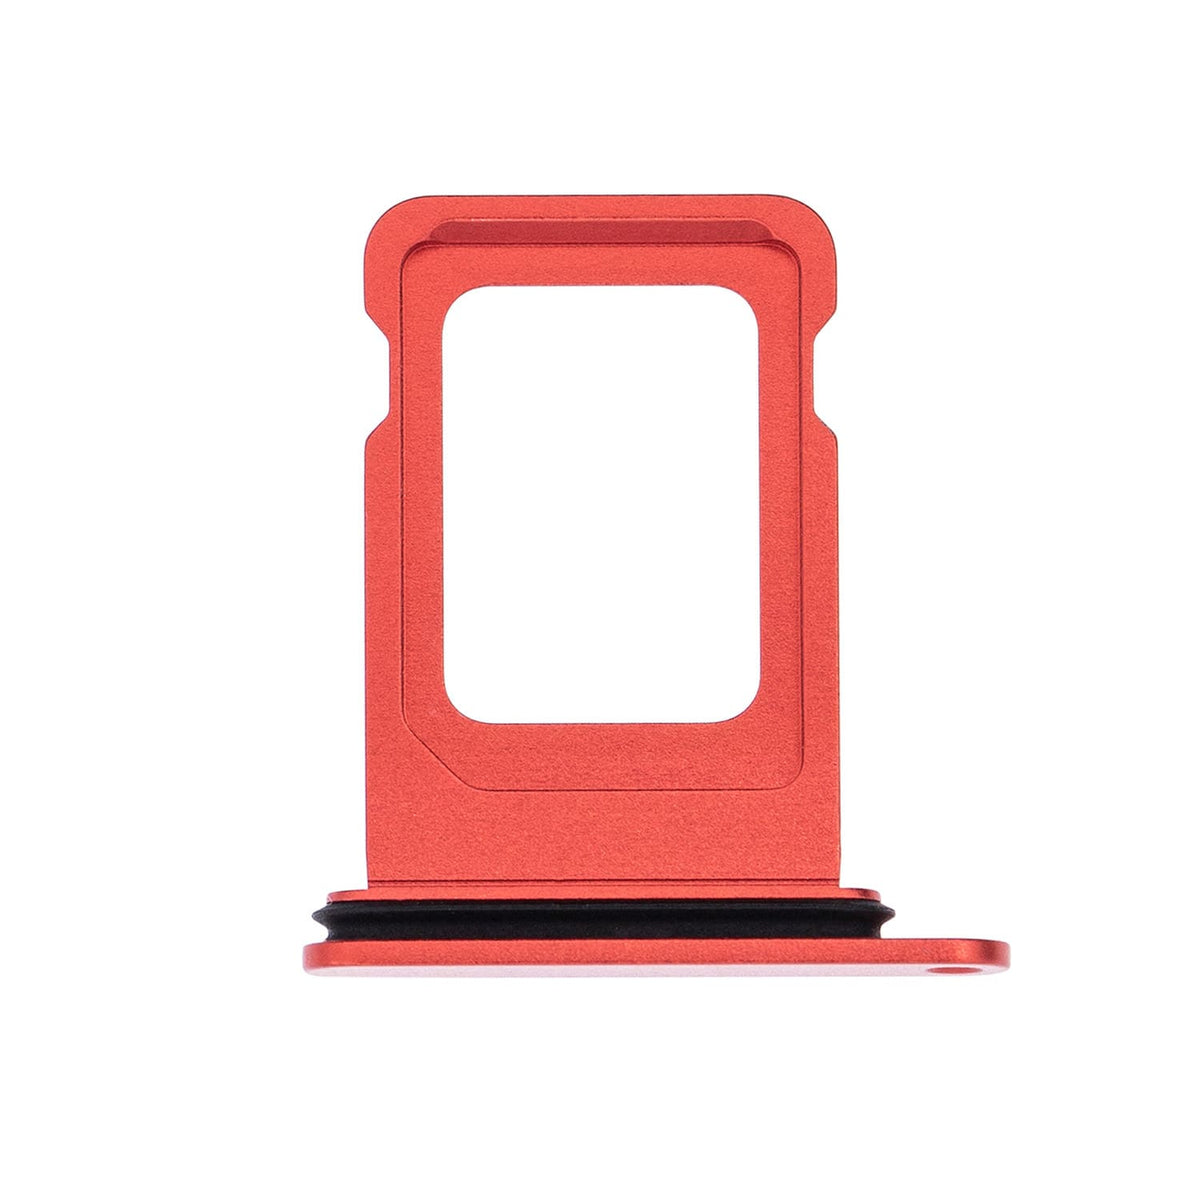 SINGLE SIM CARD TRAY FOR IPHONE 13/13 MINI - RED